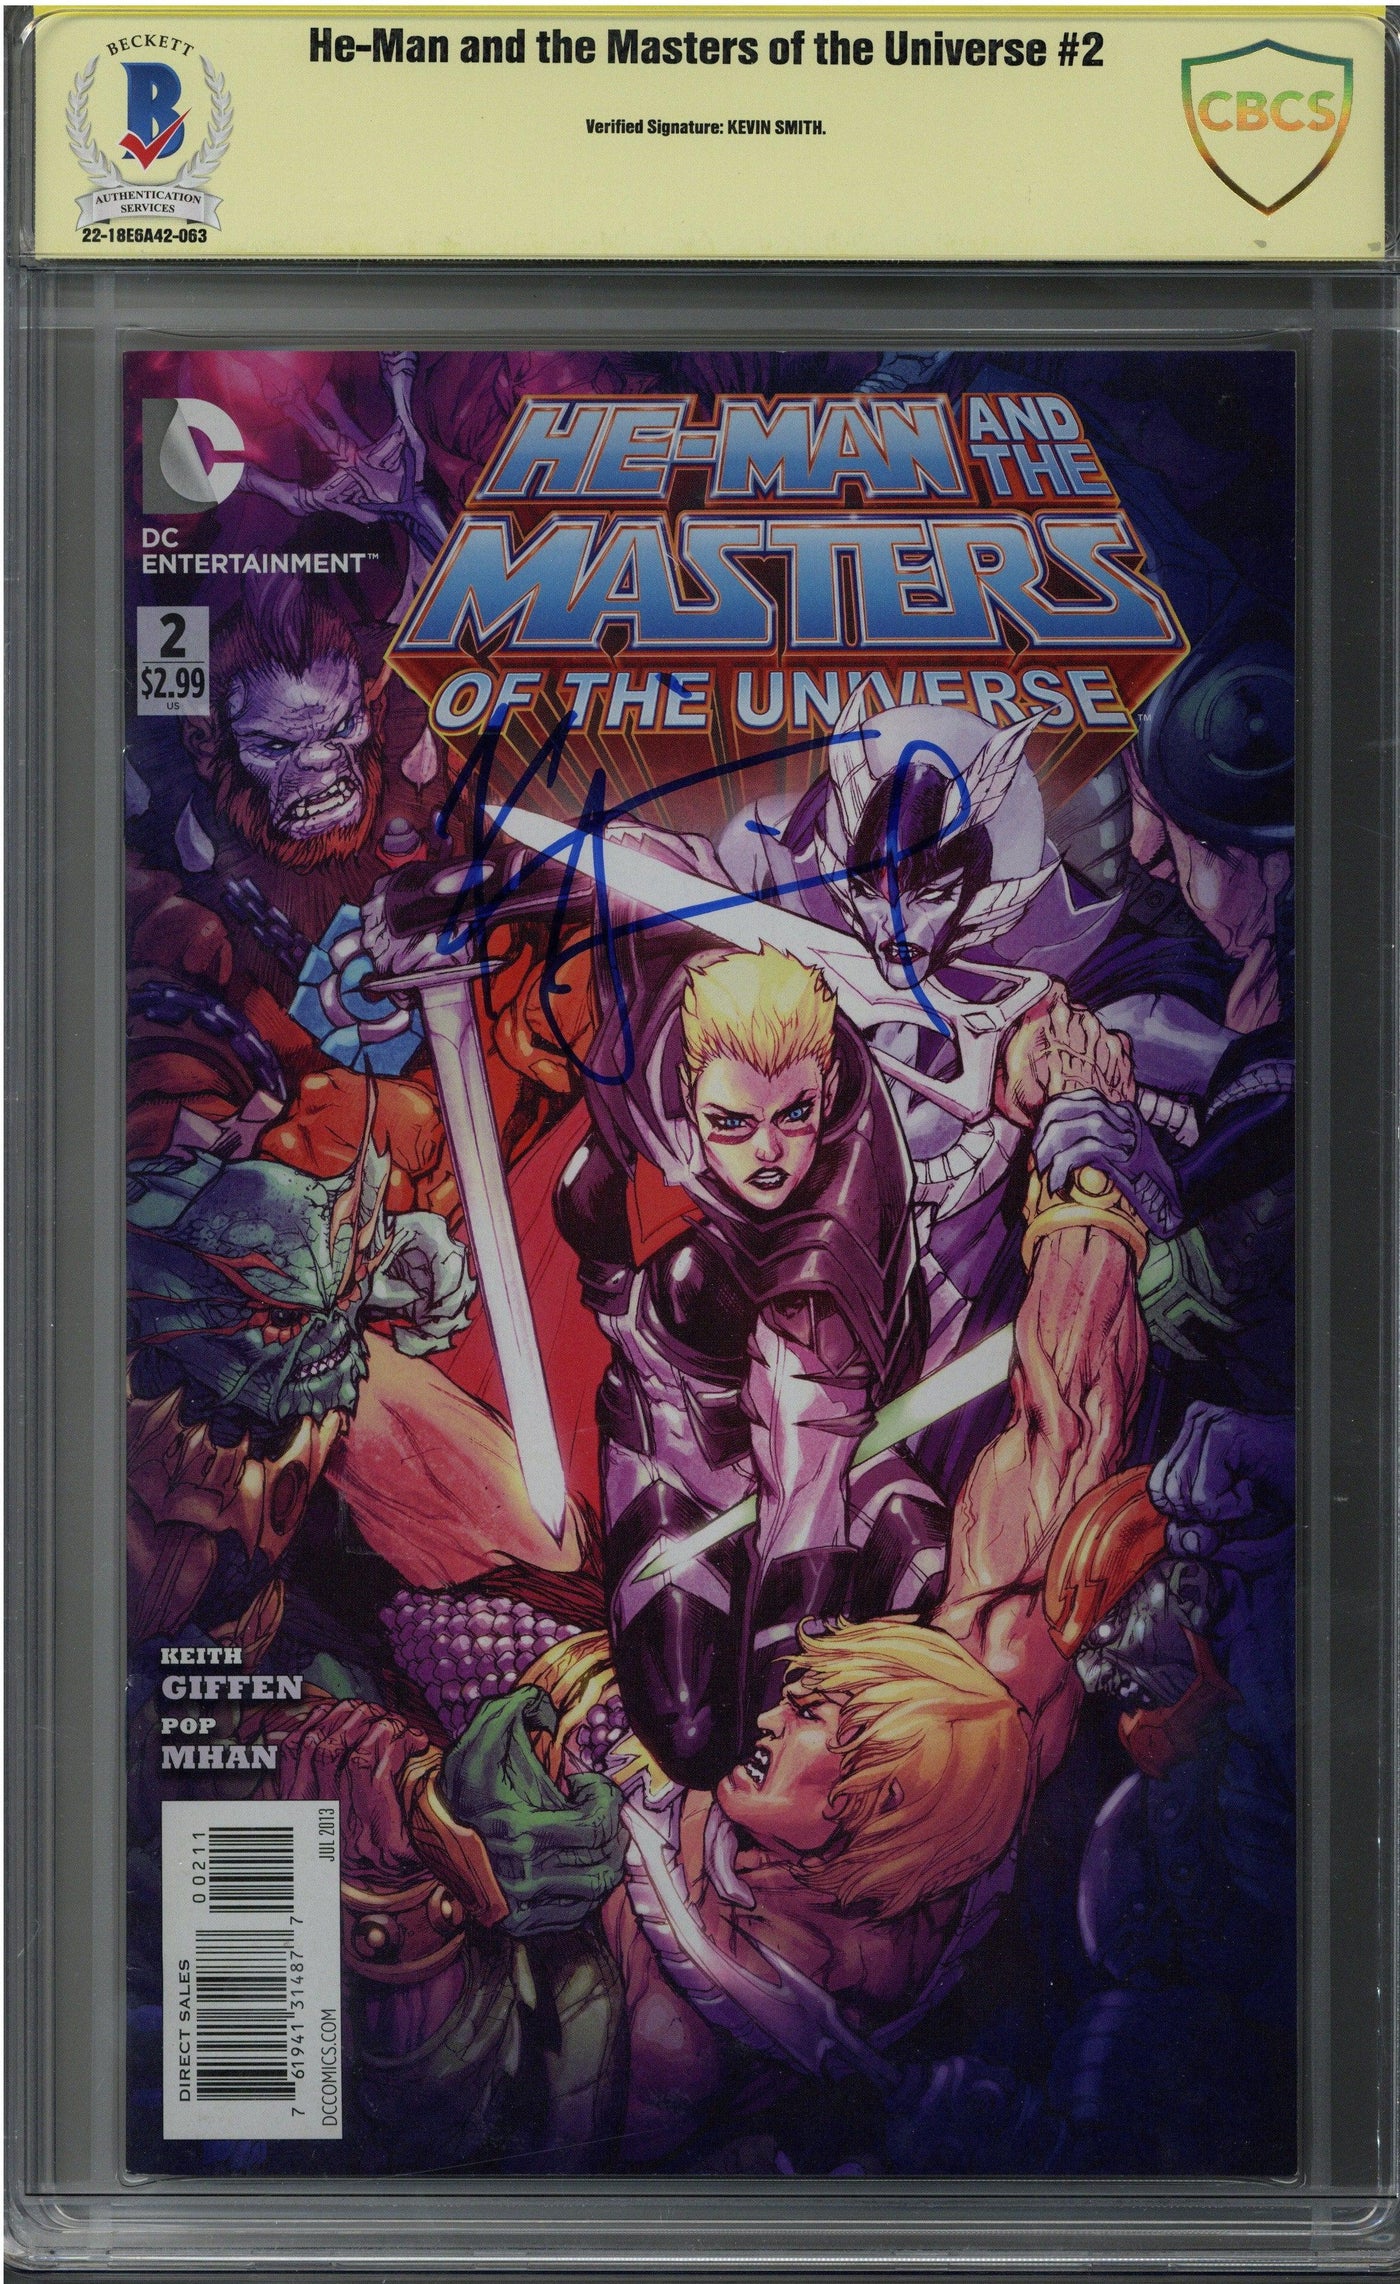 KEVIN SMITH SIGNED HE-MAN AND THE MASTERS OF THE MULTIVERSE #2 CBCS